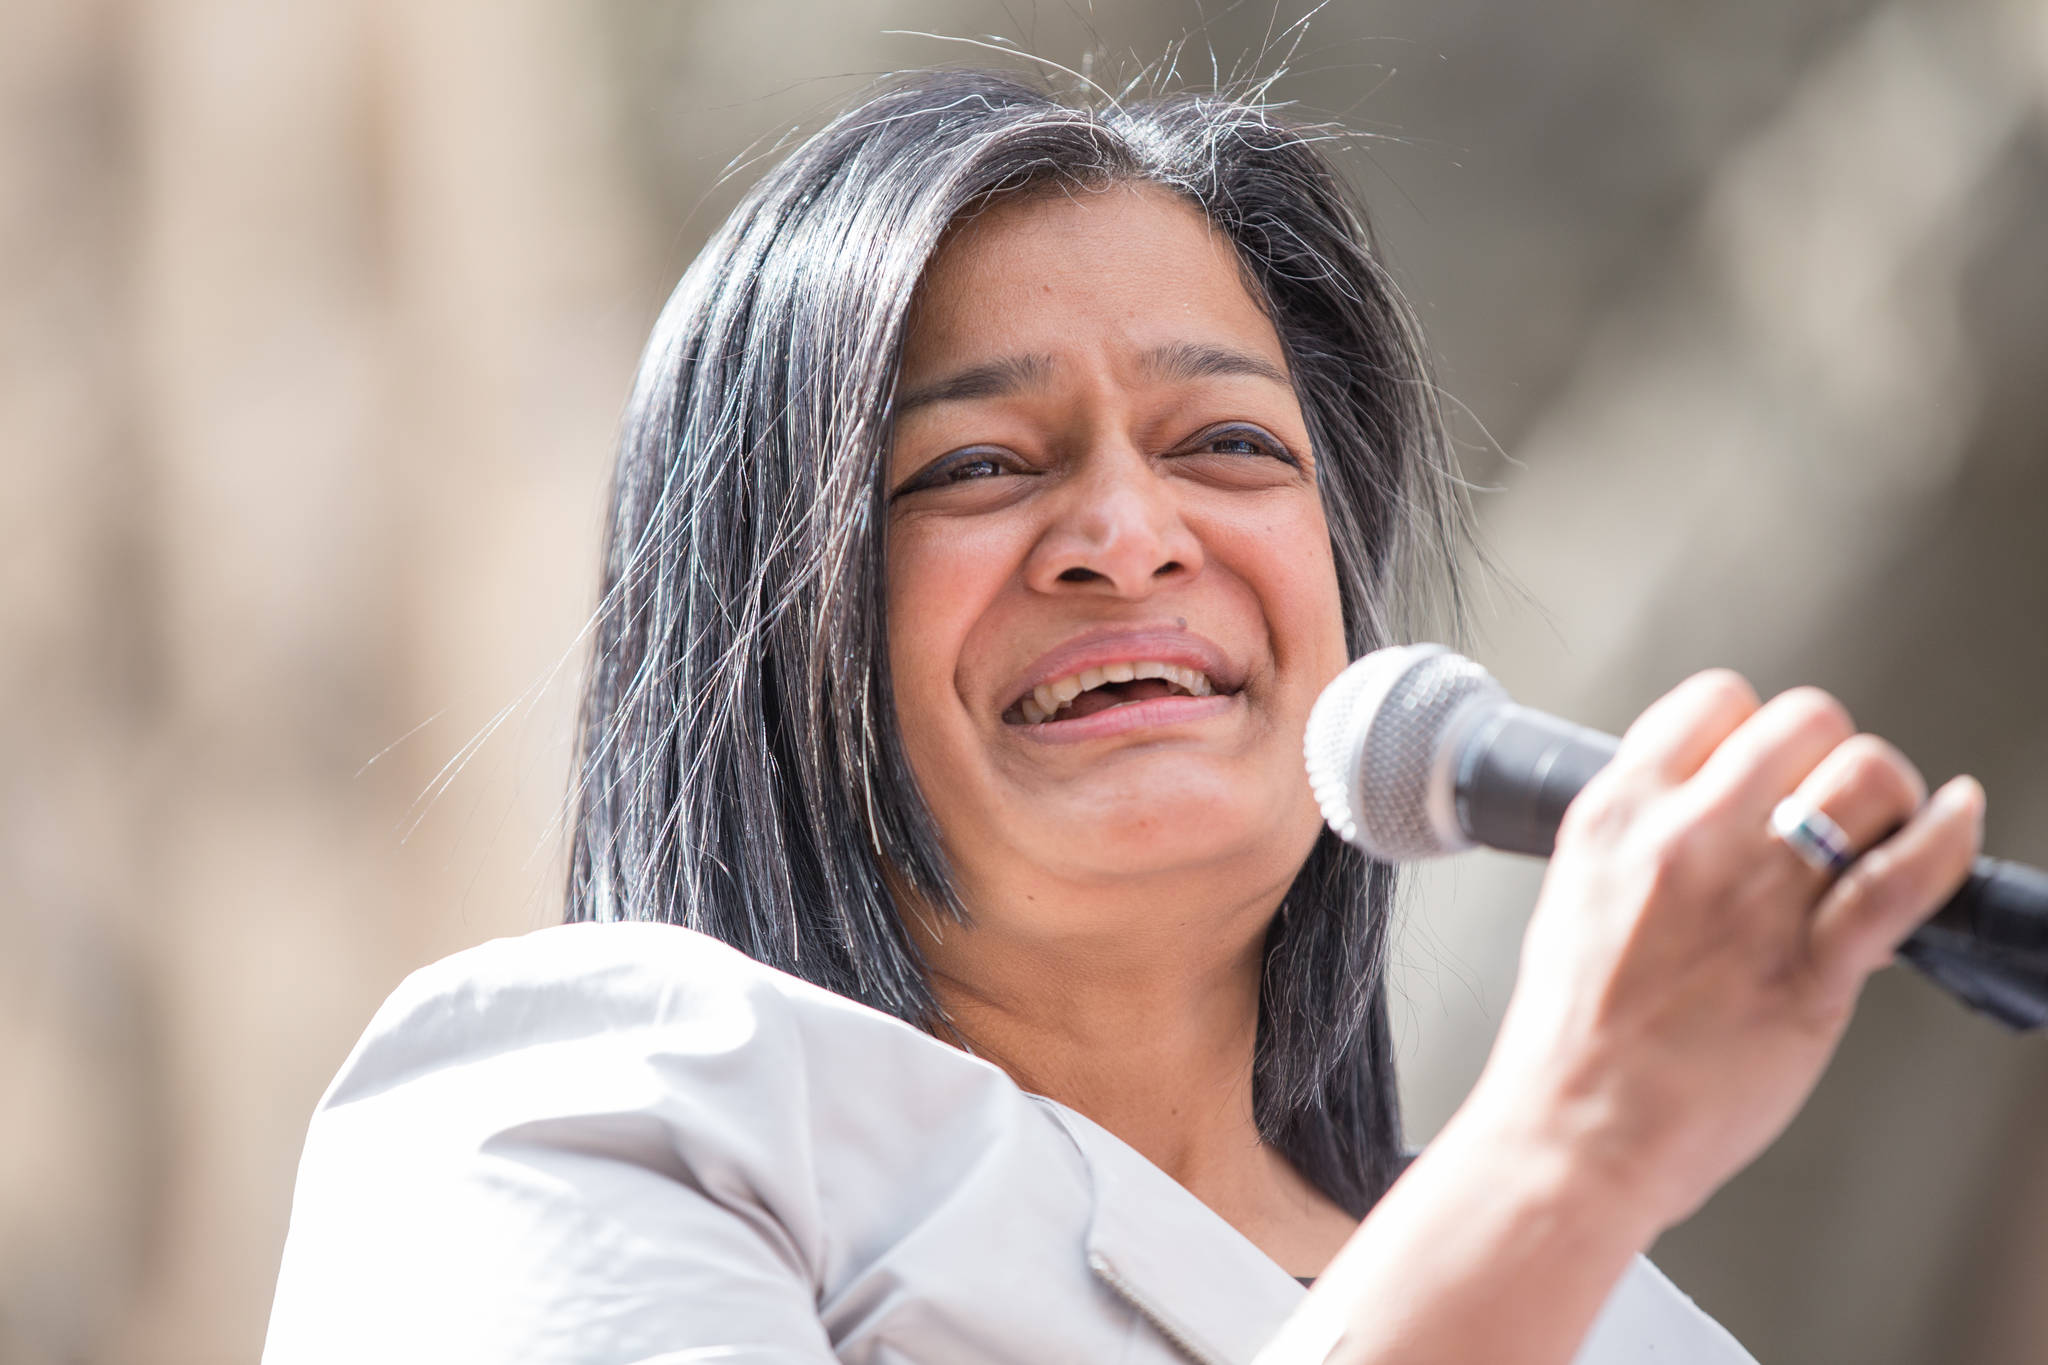 “The release of Donald Trump’s tax returns is really important, because it will show us all the conflicts of interest that may or may not exist,” U.S. Rep. Pramila Jayapal said in an interview with Seattle Weekly. “We want to see a president that is actually serving the interests of the American people and not his own financial interests.”